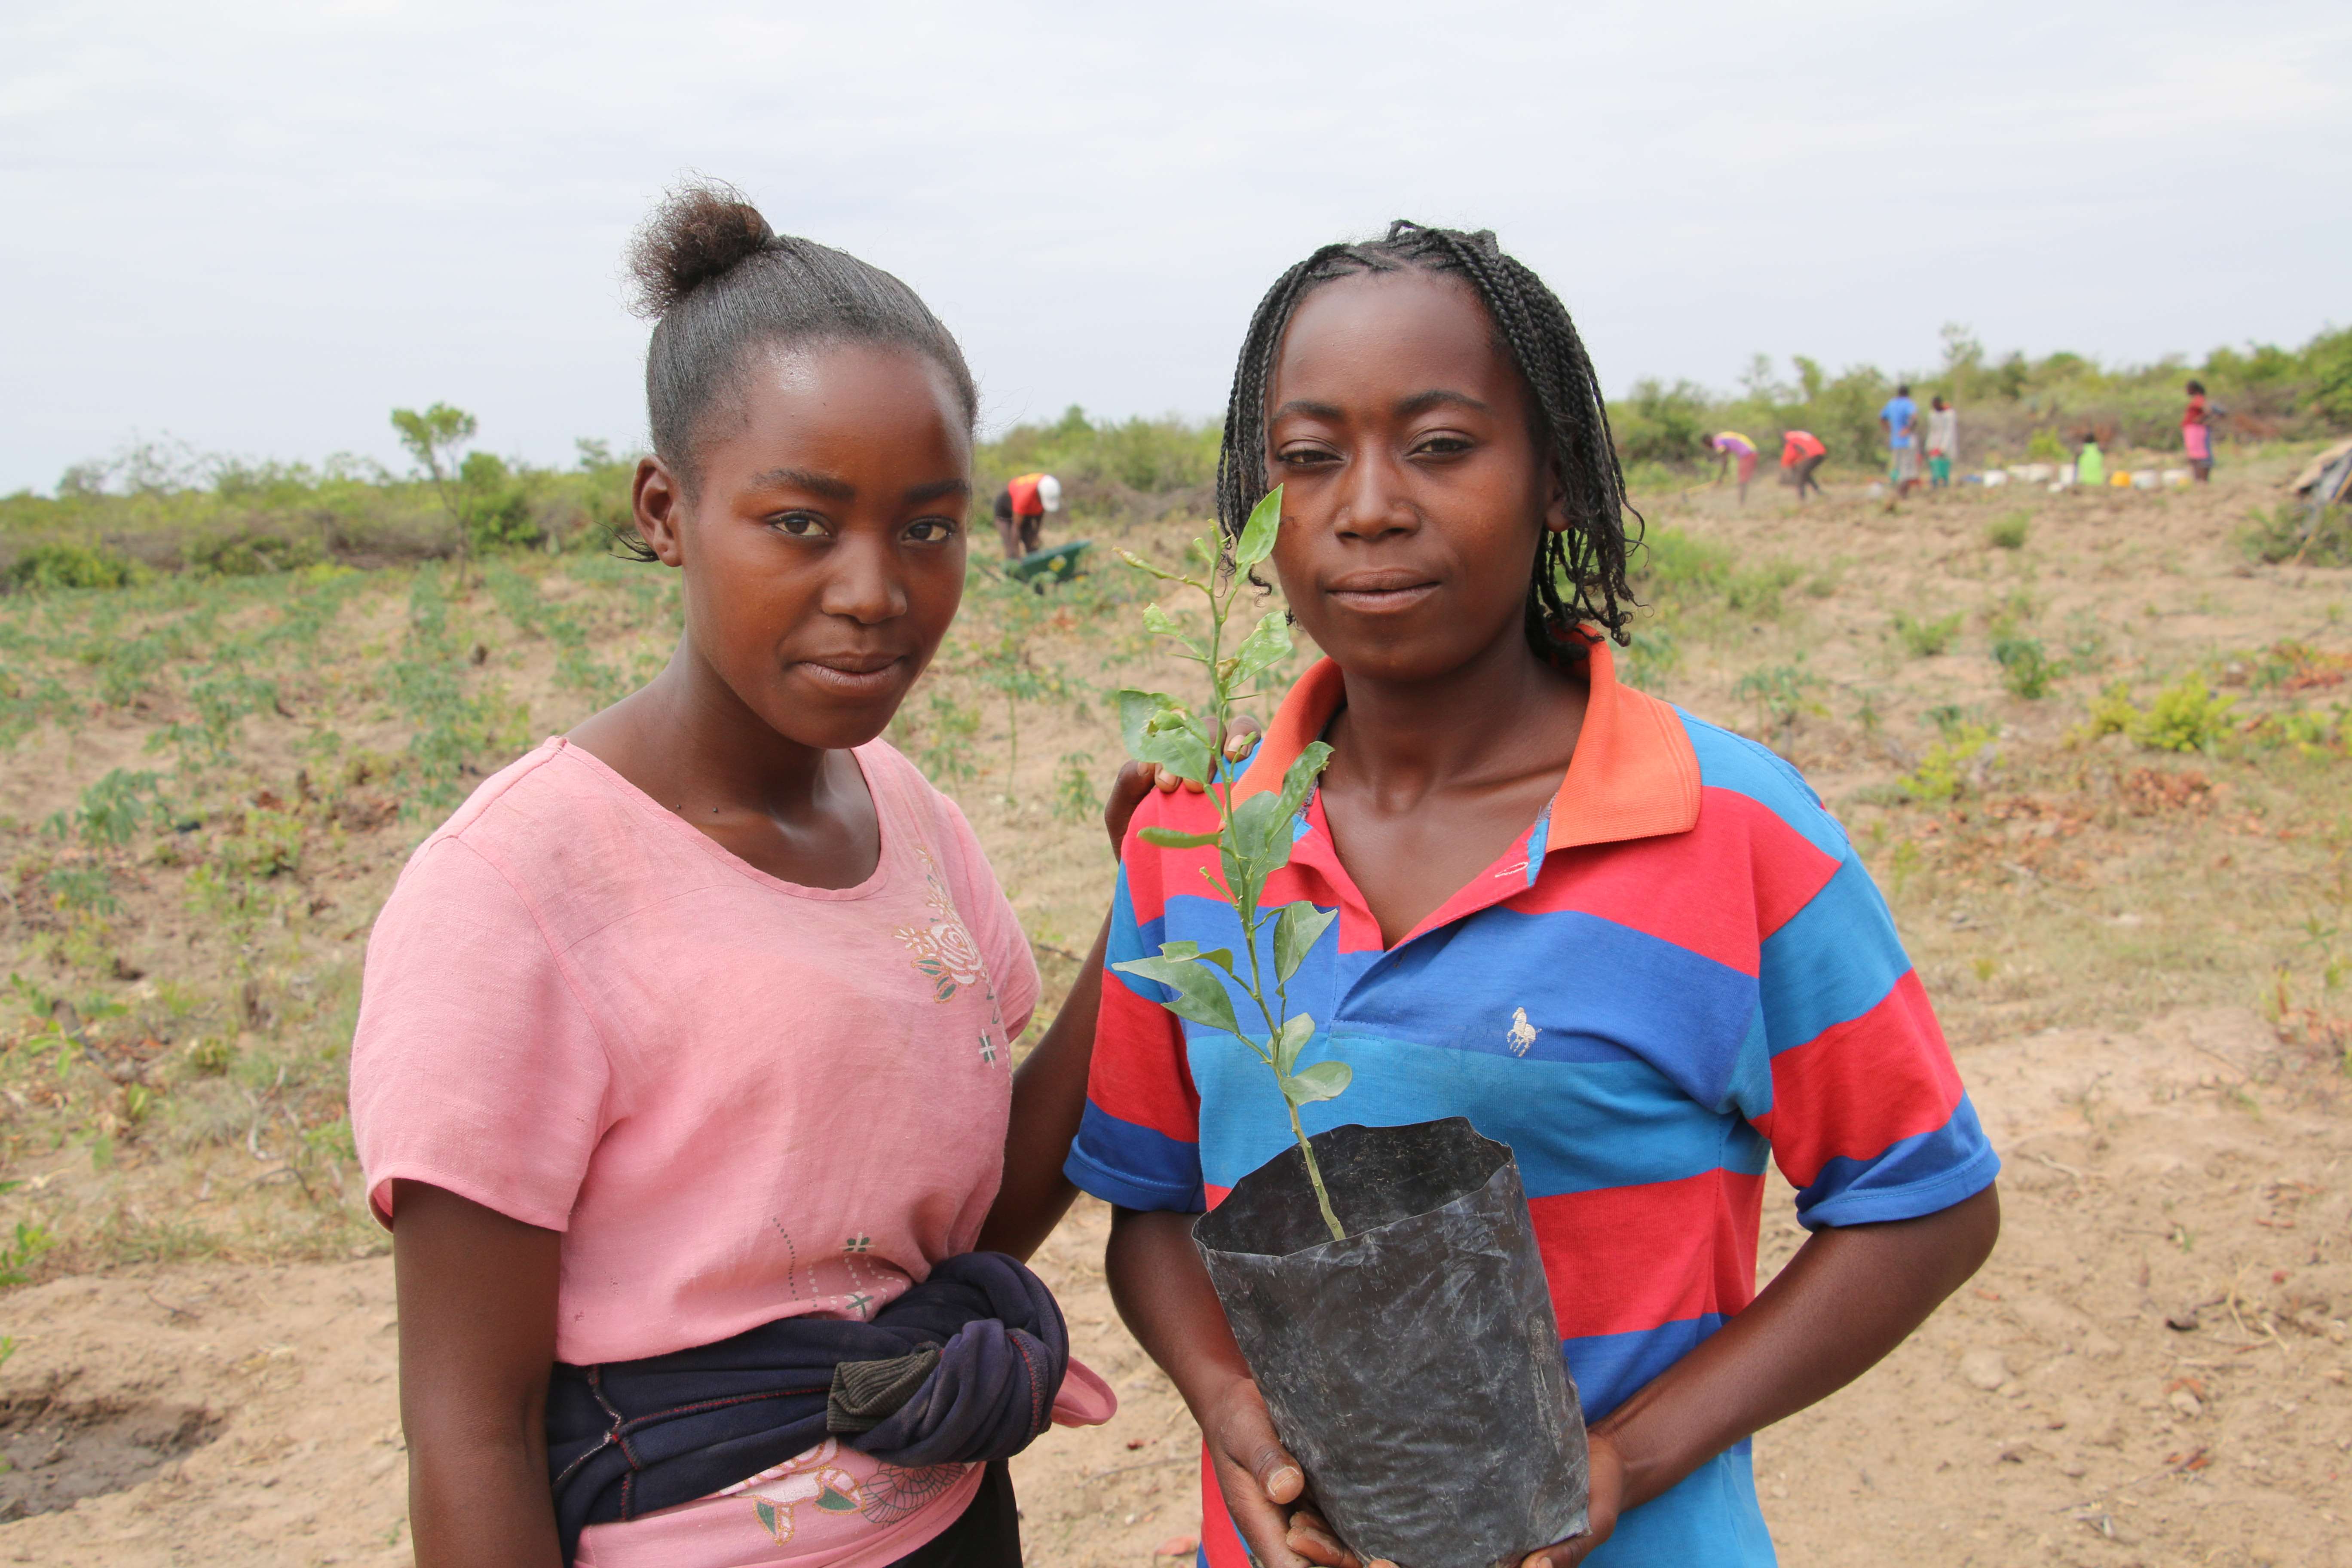 Sisters Julieta and Eularia holding up a plant pot with a crop they planted in their field farming school